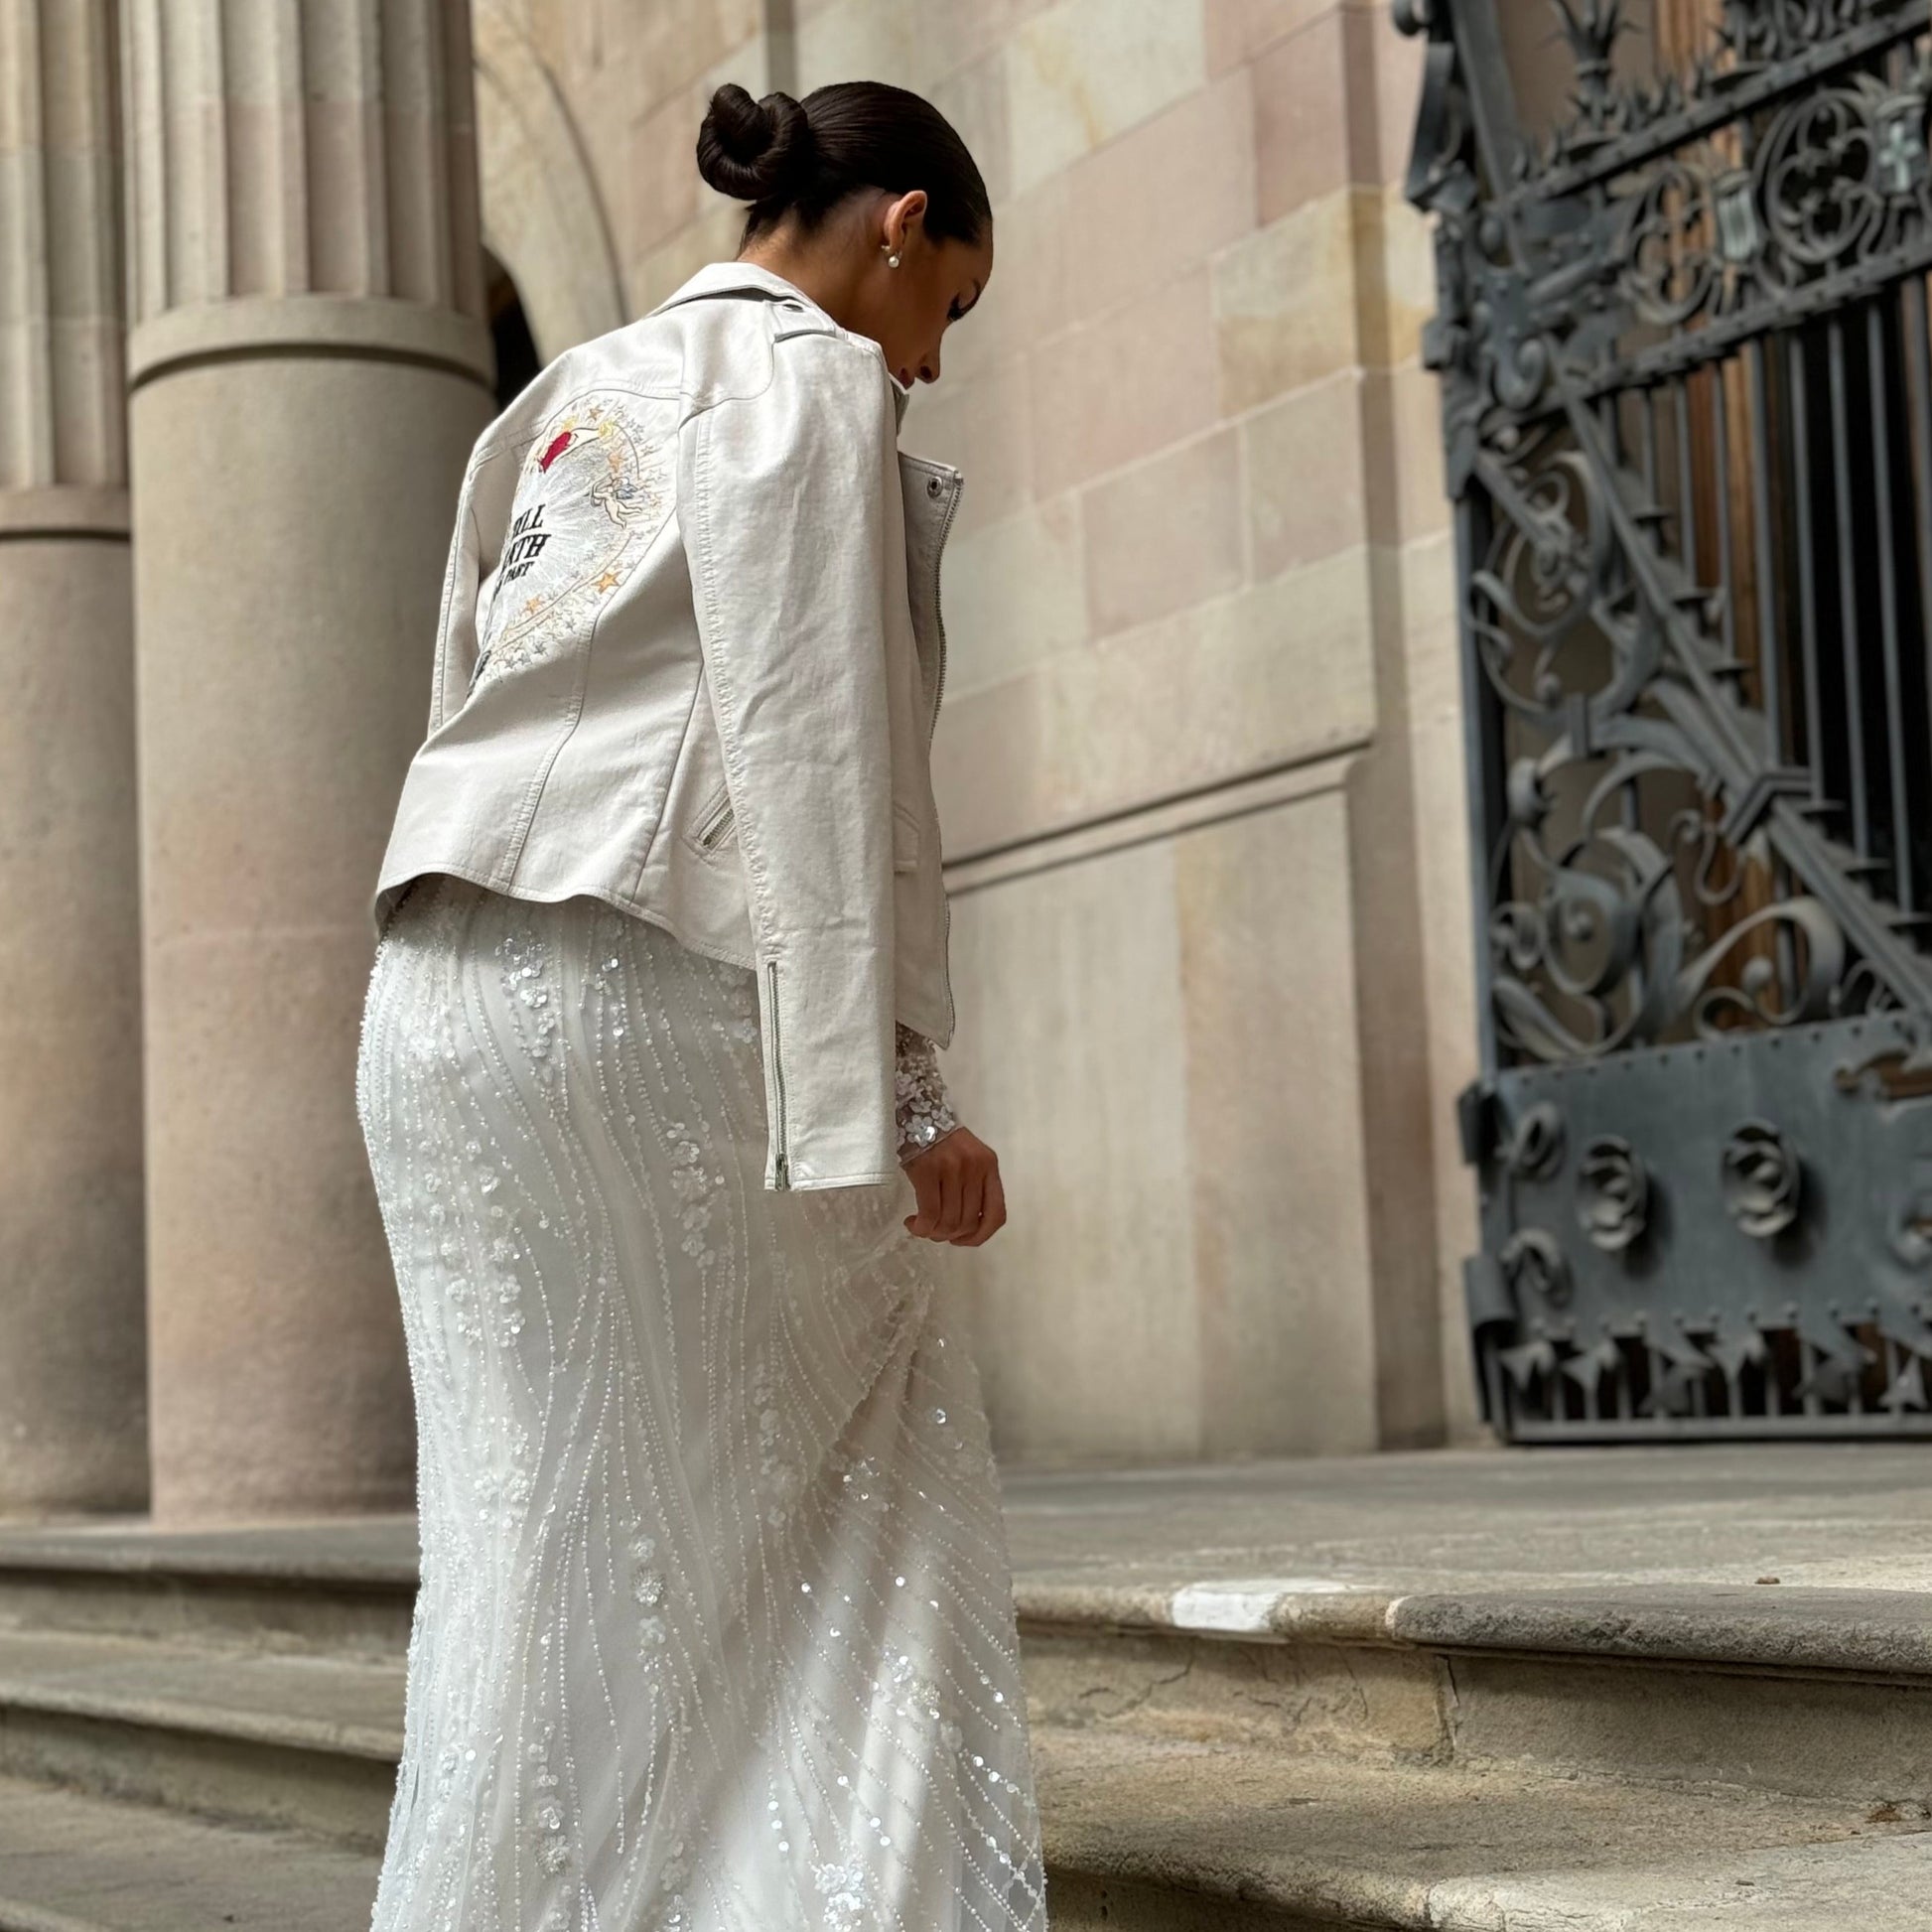 Bride wearing an Ivory Faux Leather Jacket on her Wedding Day in Barcelona